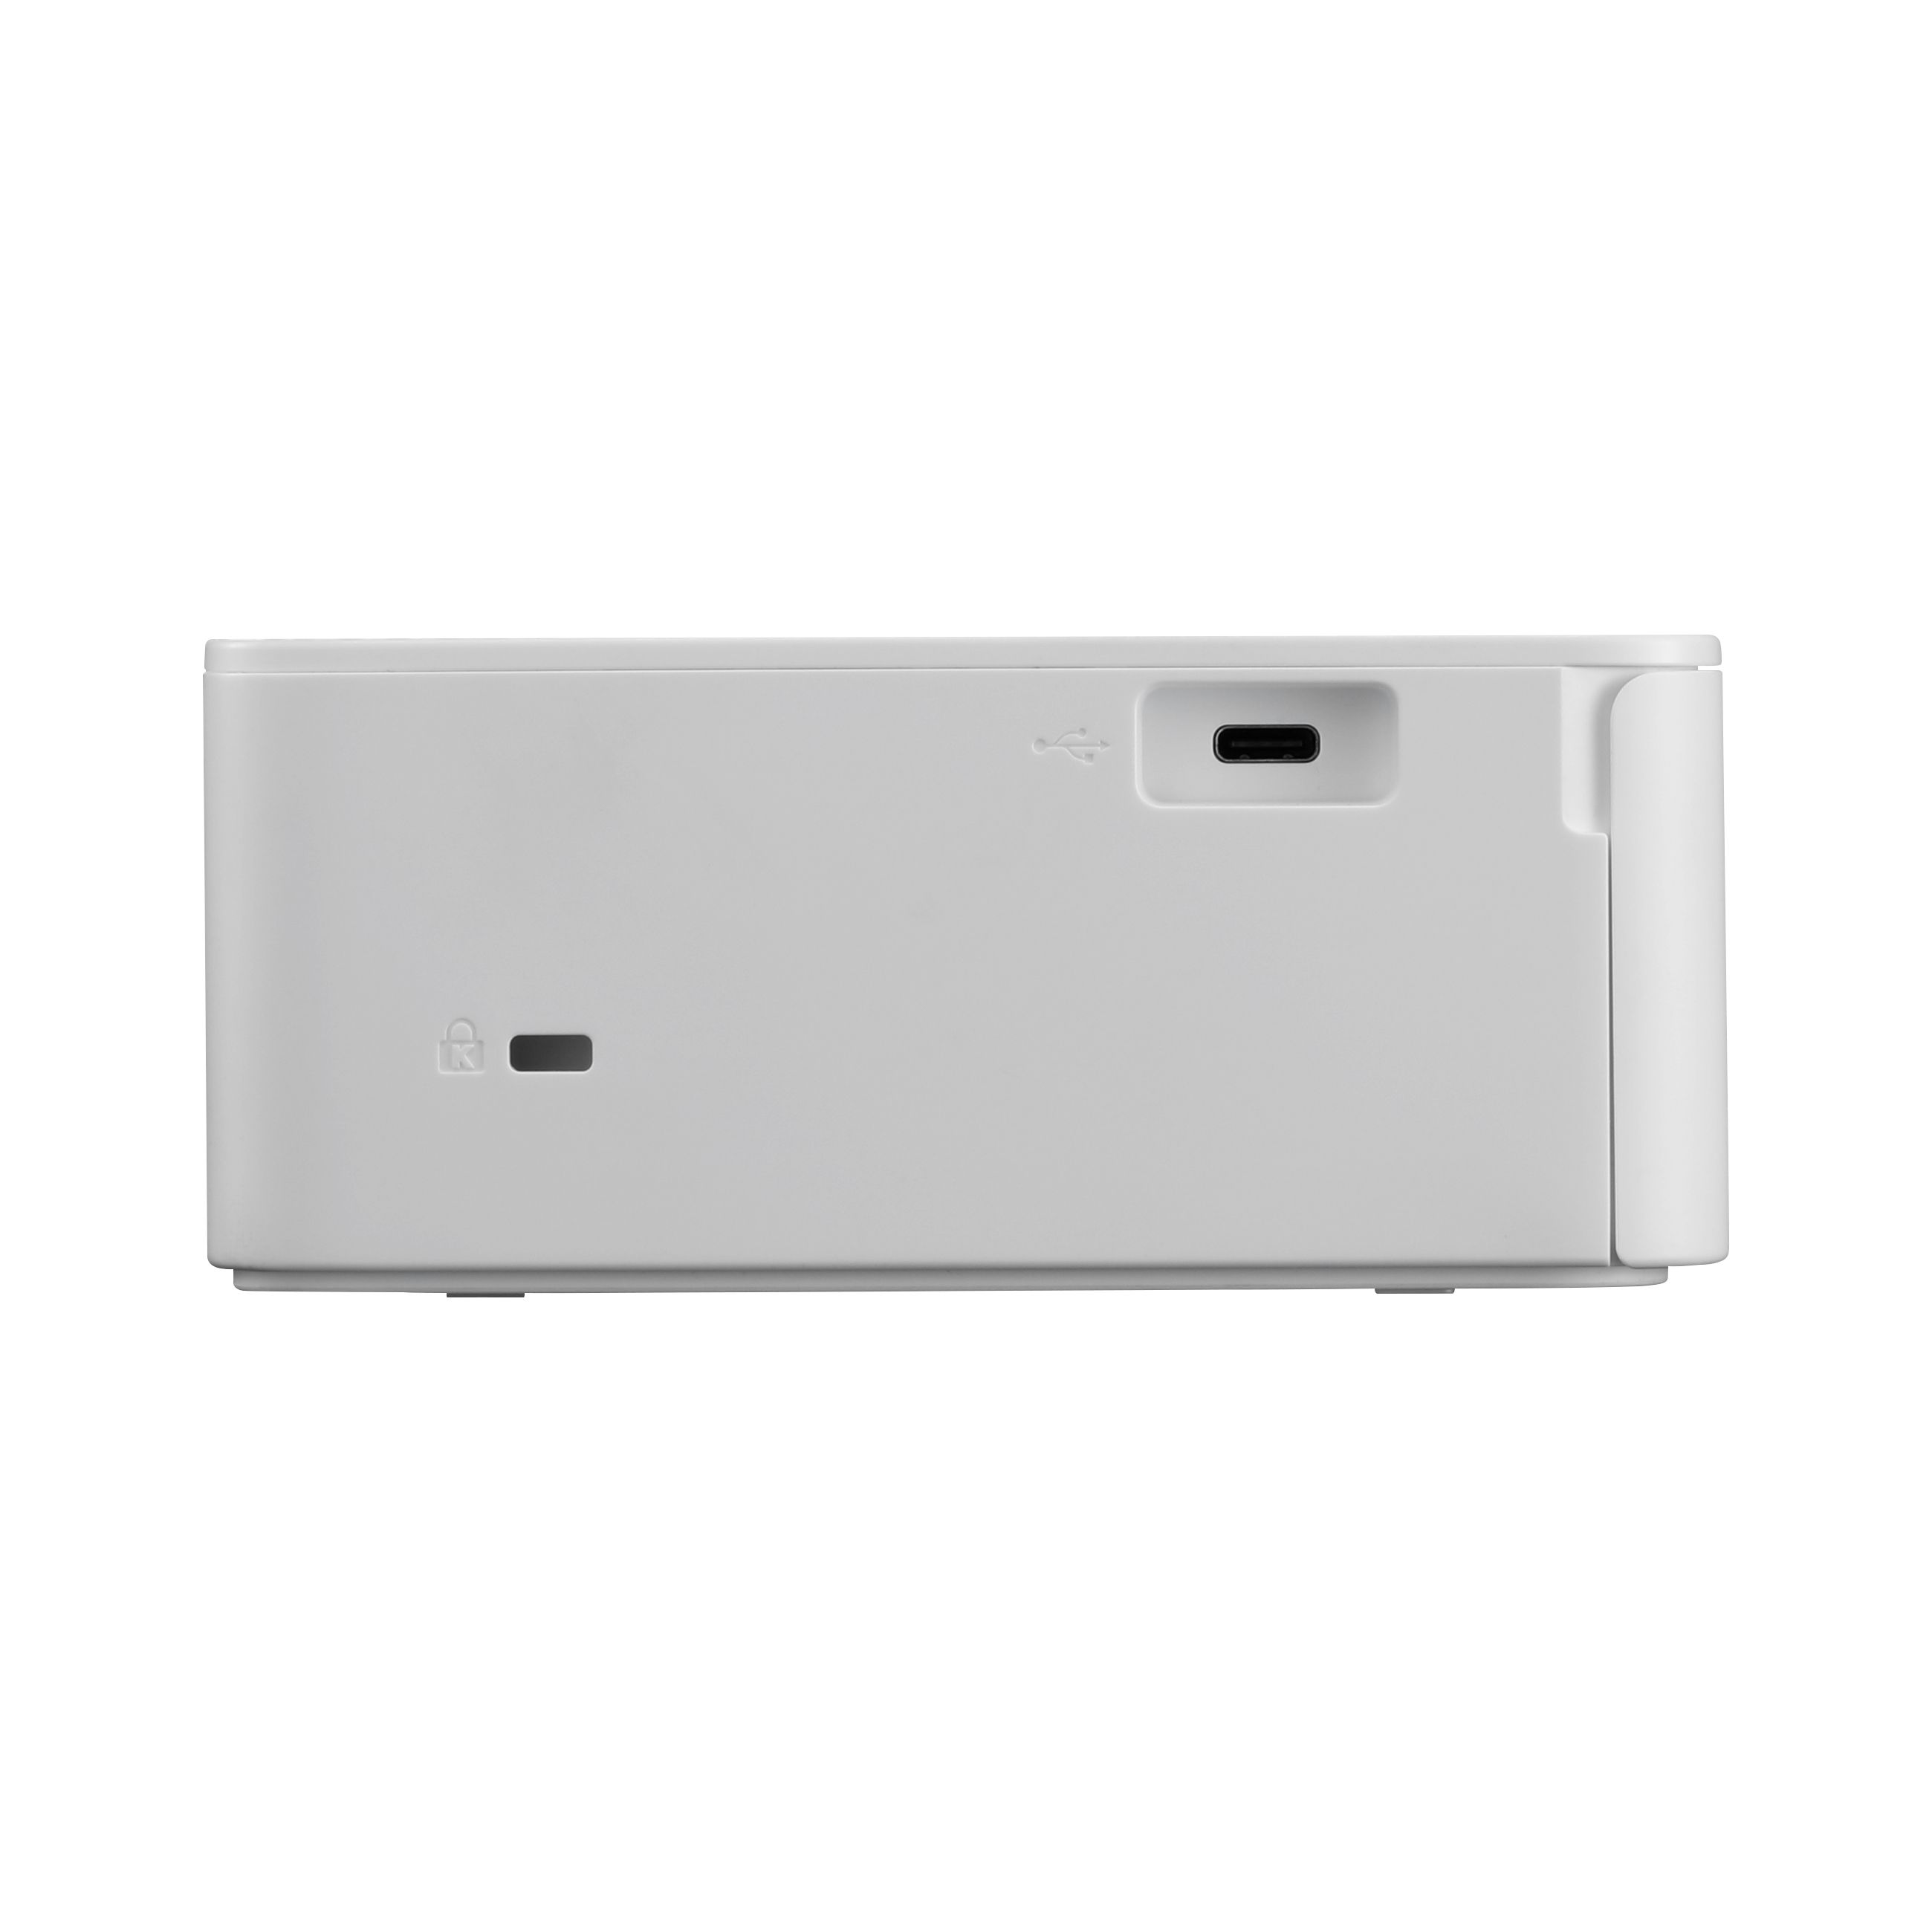 Canon Selphy CP1500 blanc - engelberger ag